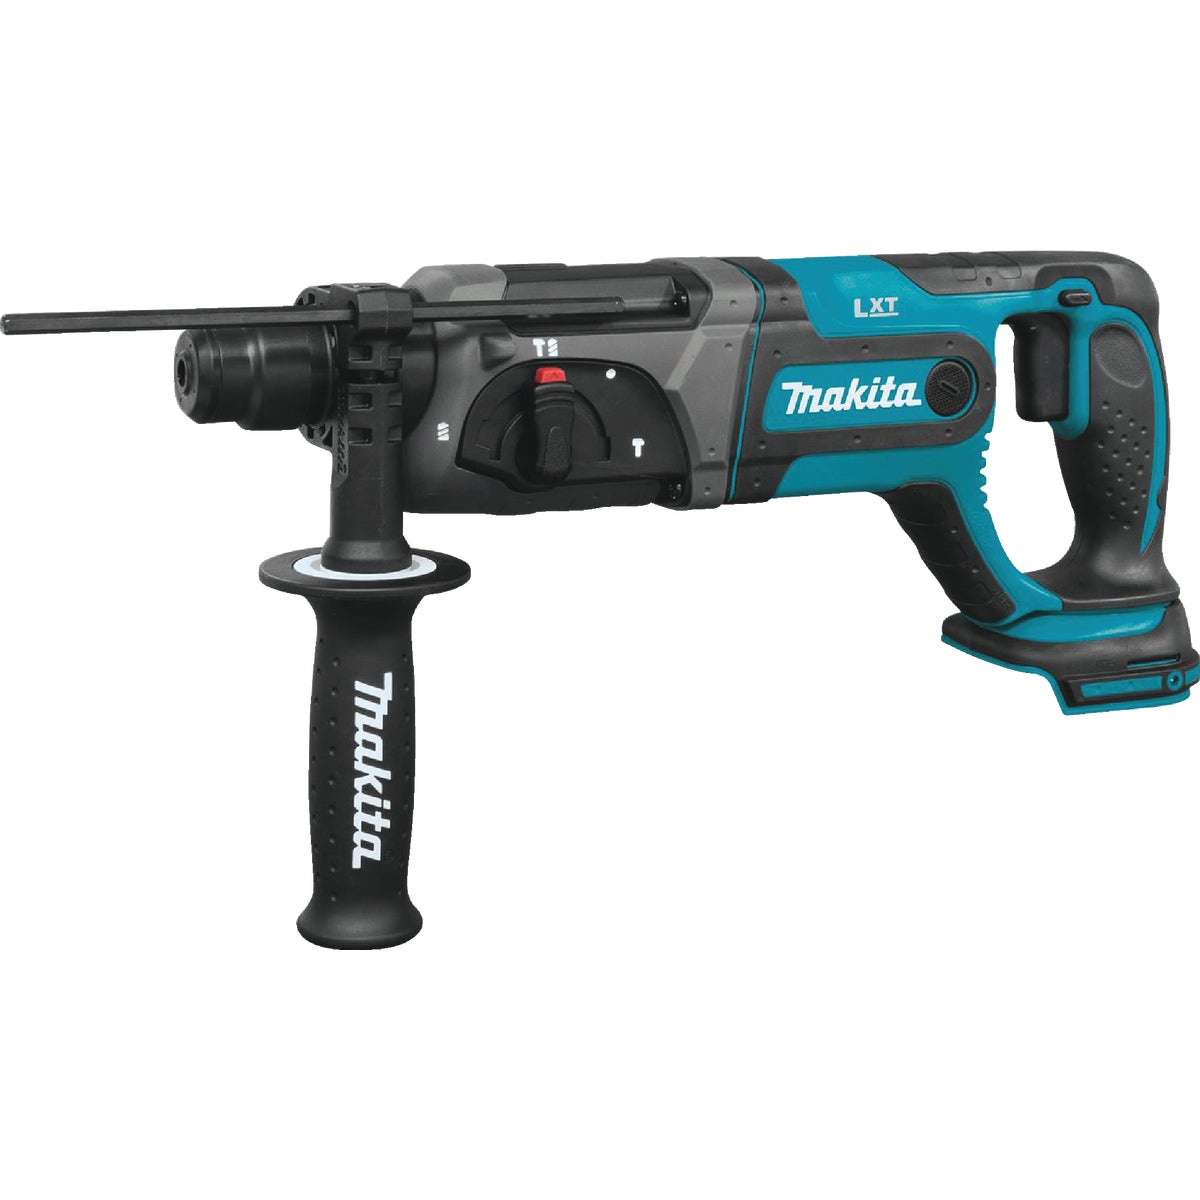 Makita 18 Volt LXT Lithium-Ion 7/8 In. Brushless SDS-Plus Cordless Rotary Hammer Drill (Tool Only)